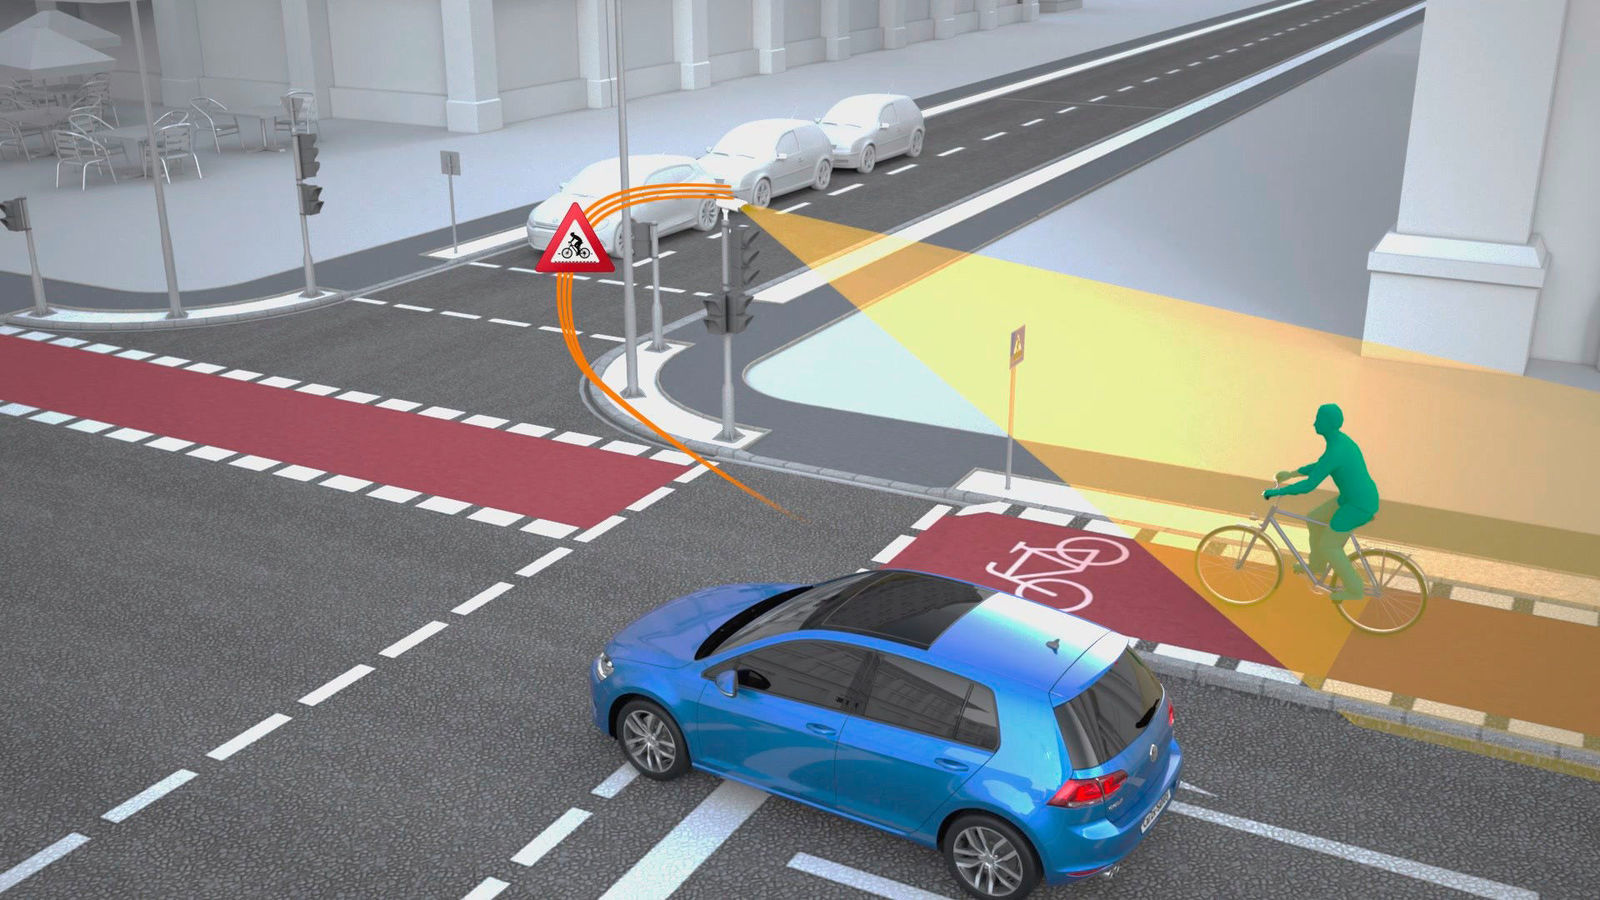 Sensors at traffic lights detect cyclists and warn the driver